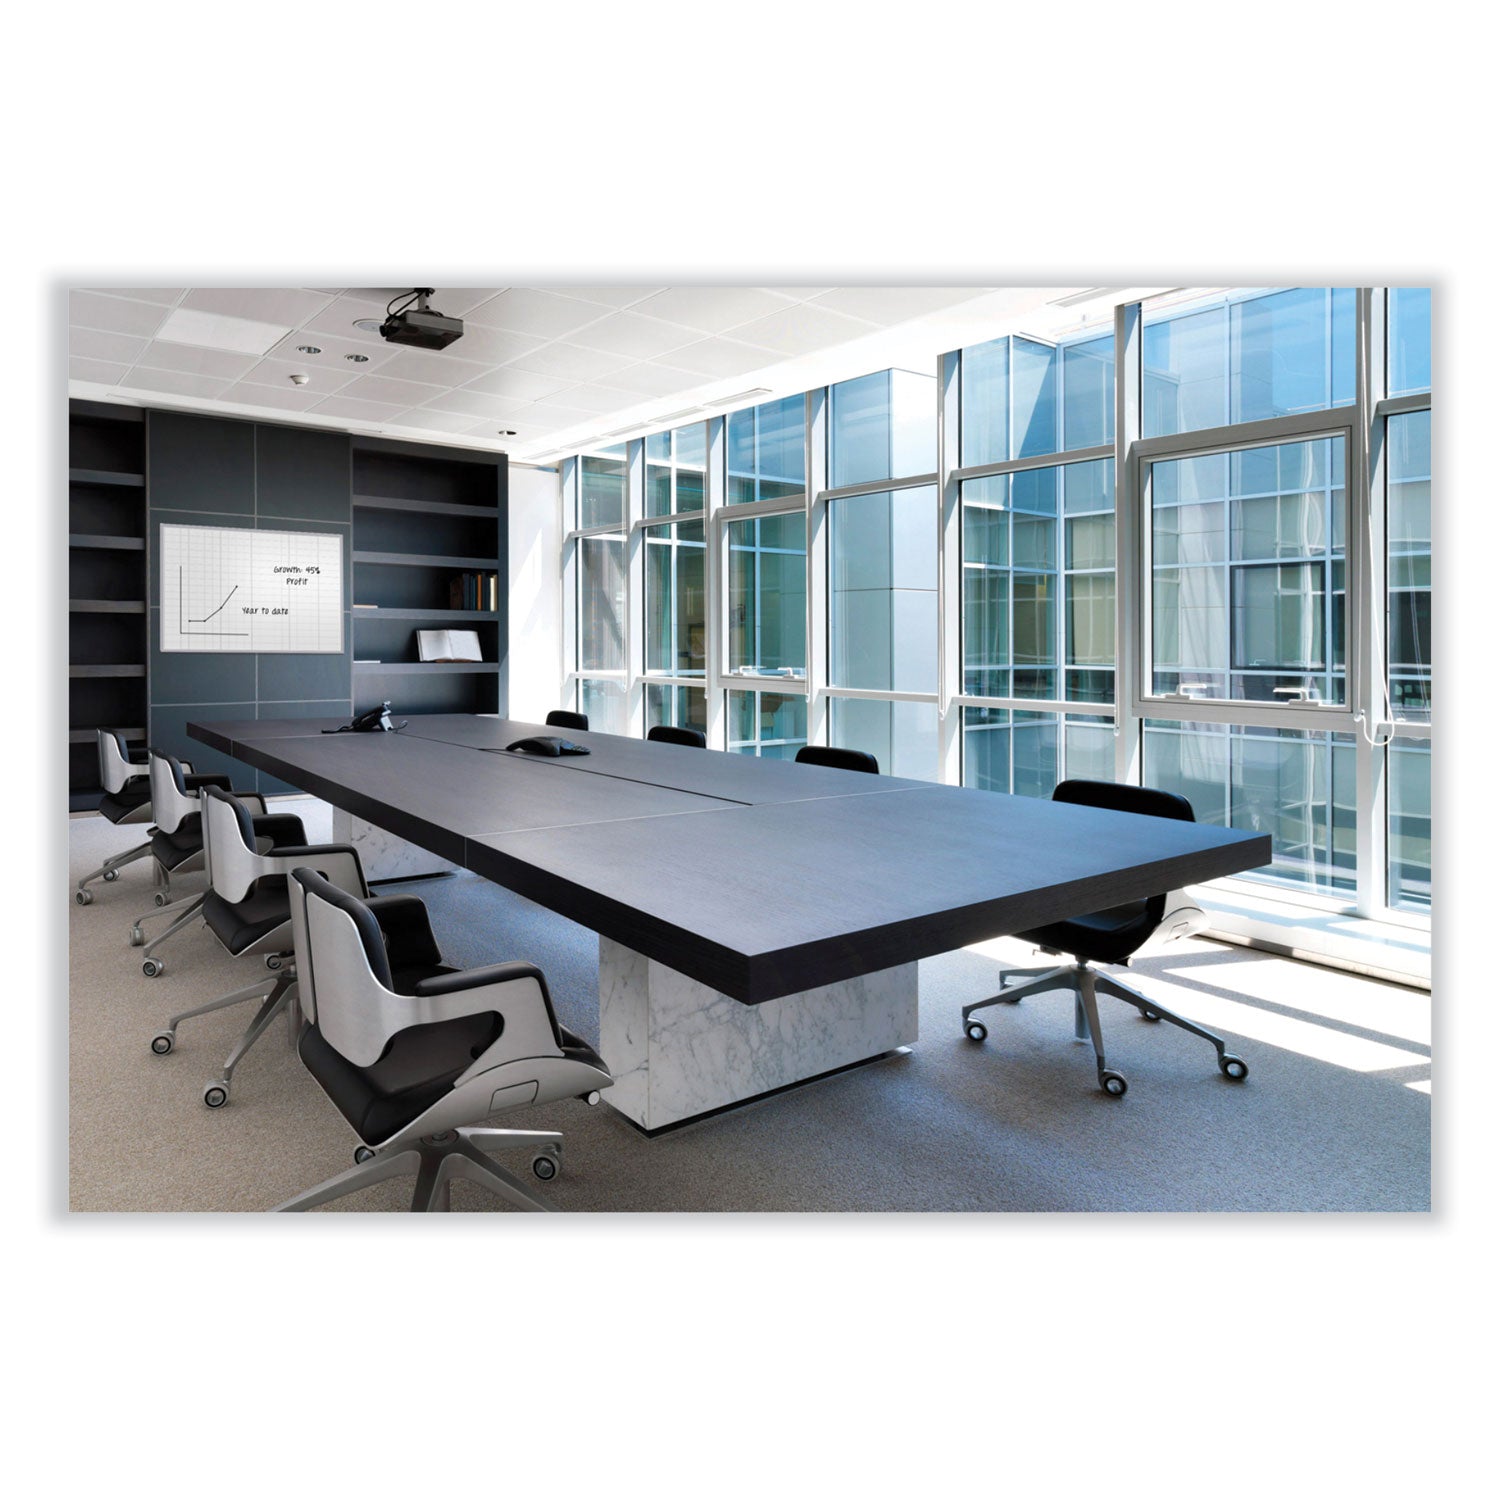 magnetic-porcelain-whiteboard-with-satin-aluminum-frame-365-x-605-white-surface-ships-in-7-10-business-days_ghem1354 - 4